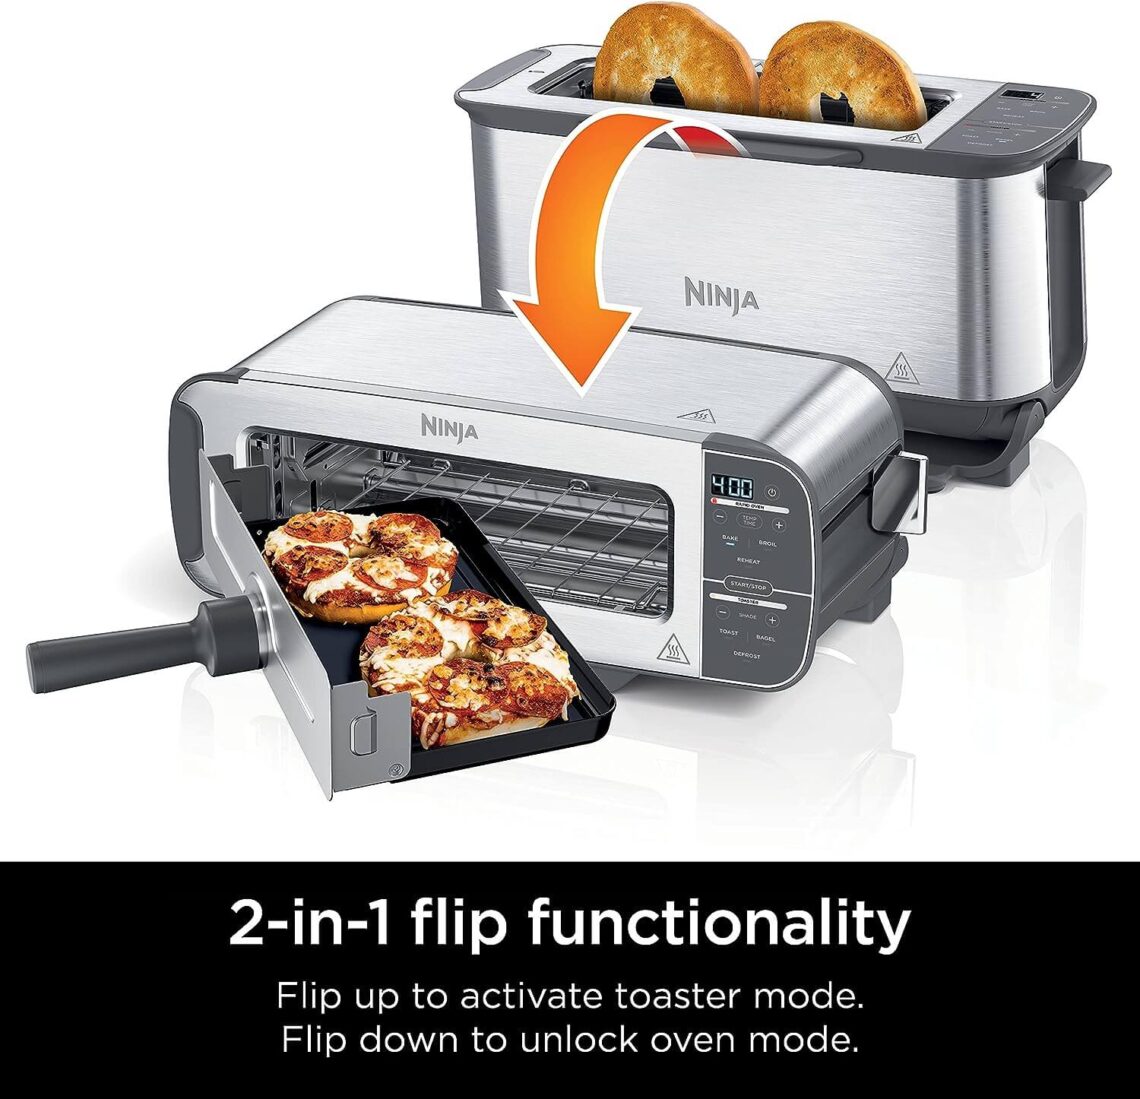 Flipping Breakfast to Snacks: My Culinary Adventure with the Ninja Foodi 2-in-1 Flip Toaster Oven 5